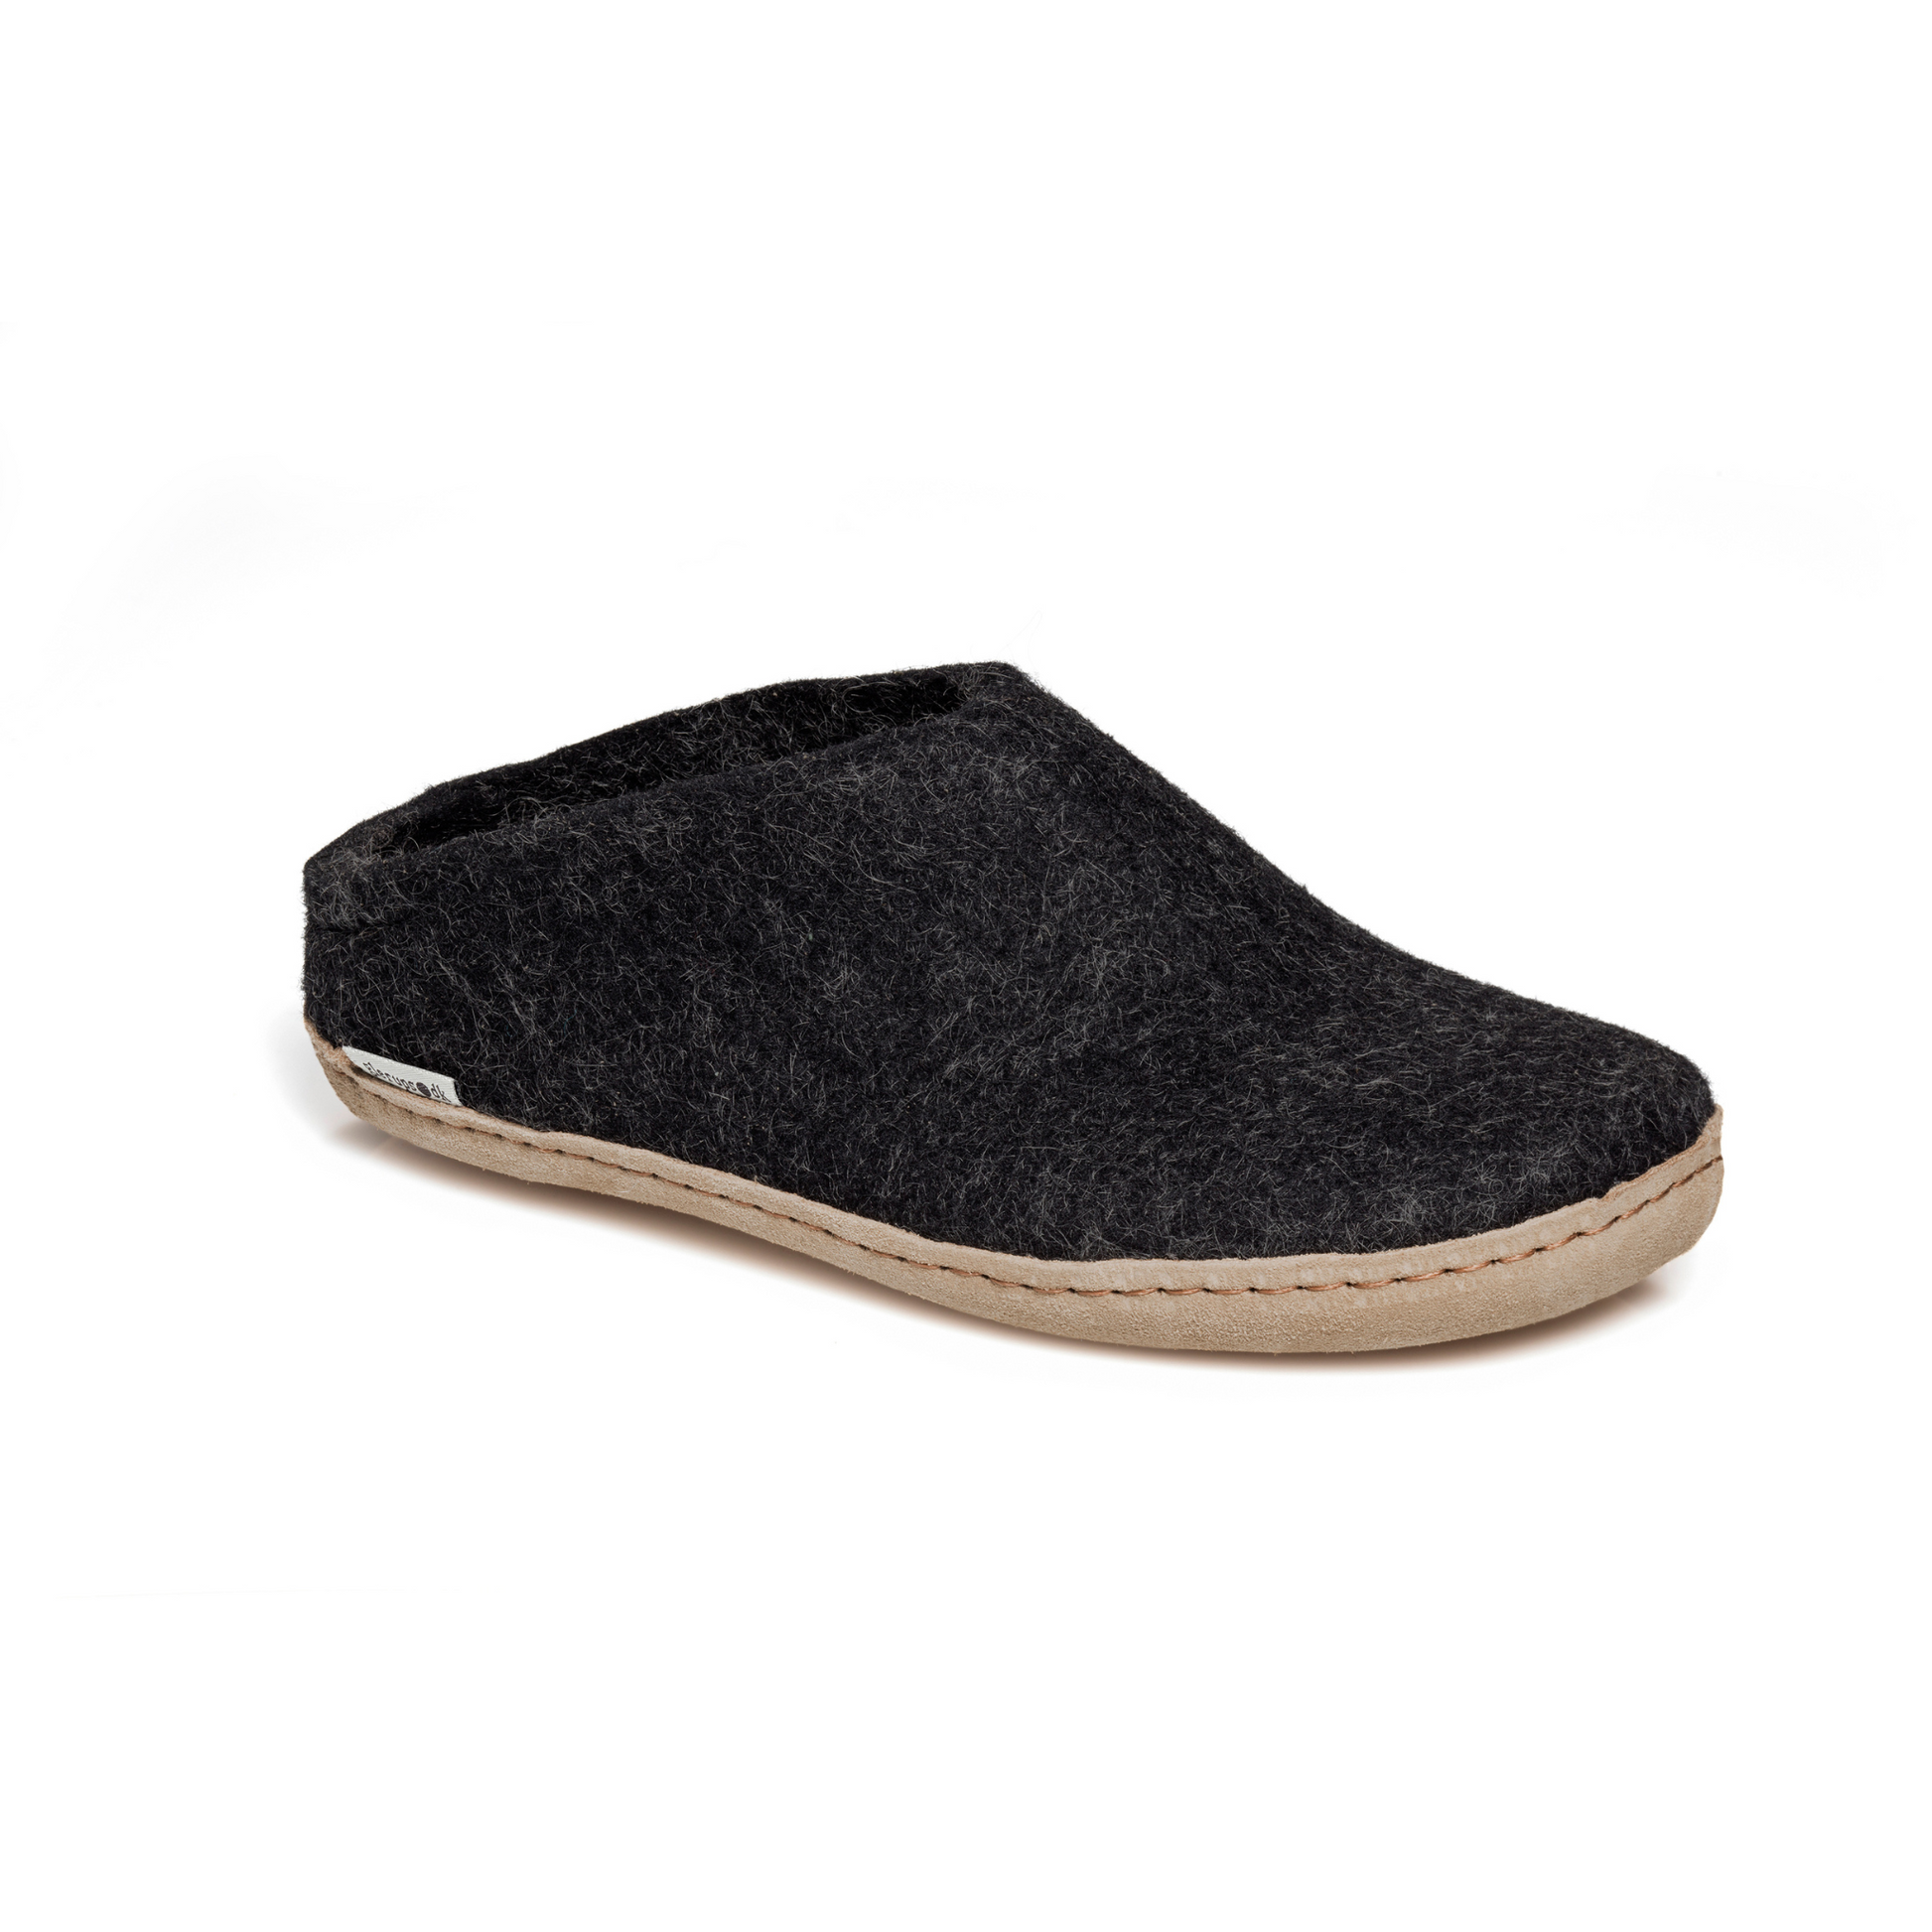 A felted dark grey slipper pictured at a slight angle, showing part of the top front and side of the slipper. A tan leather sole lines the bottom of the shoe with a row of stitching.